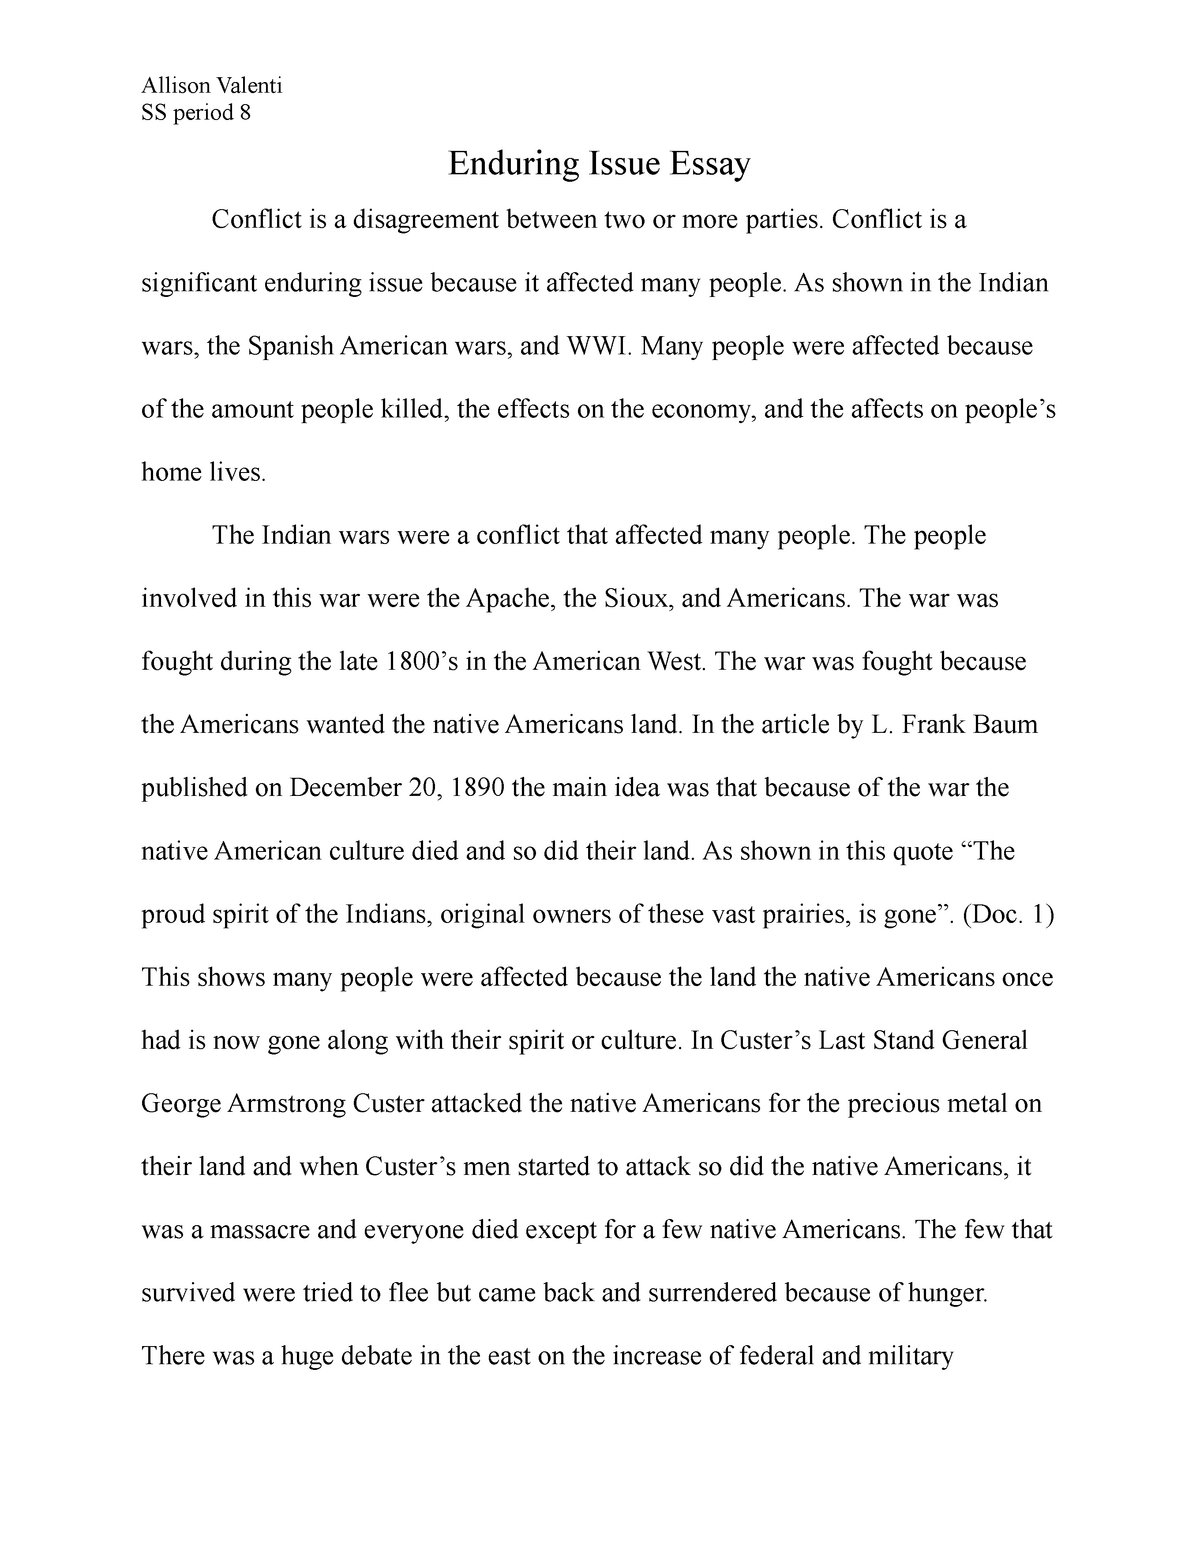 conflict enduring issue essay example